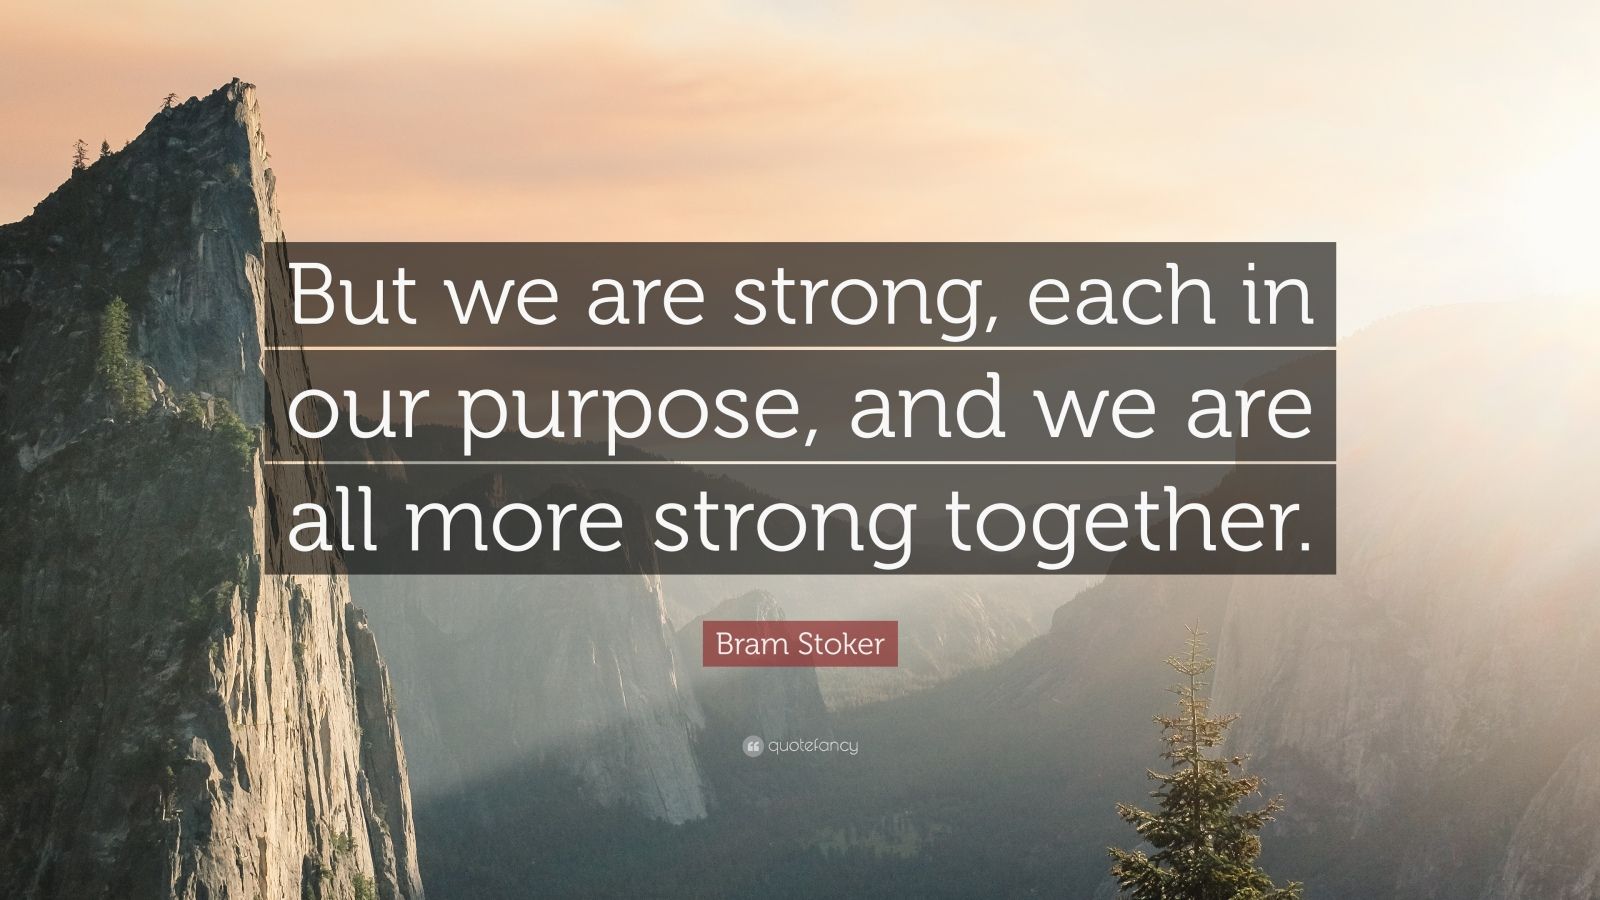 Bram Stoker Quote: “But we are strong, each in our purpose, and we are